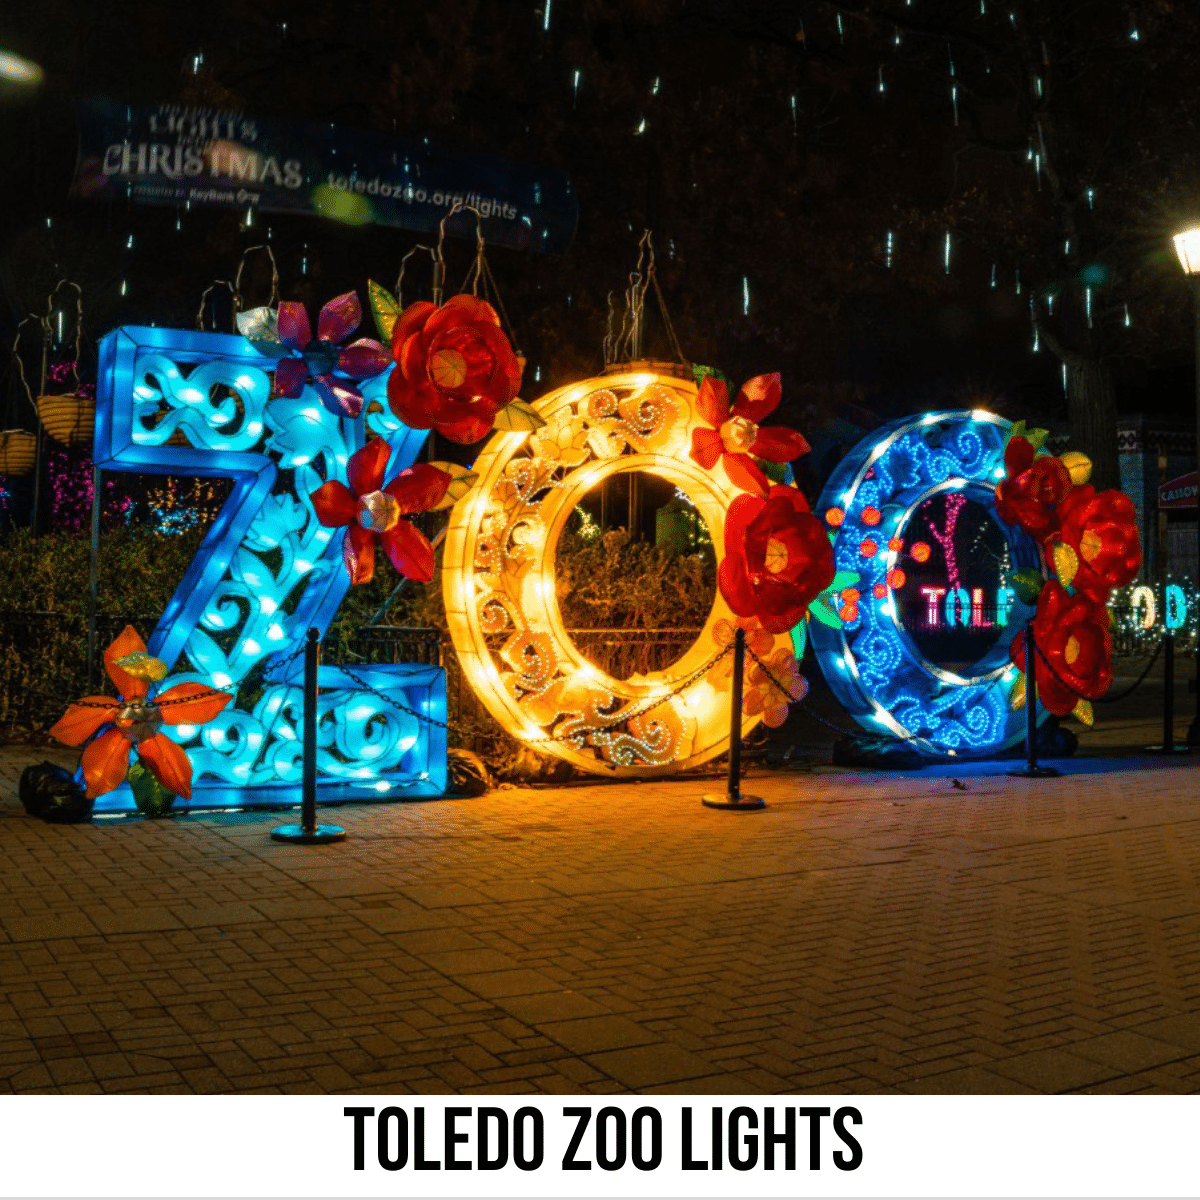 square image with a photo of the word ZOO lit up and decorated with flowers. A white strip across the bottom has the text Toledo Zoo Lights. Image courtesy of Toledo Zoo Lights Before Christmas